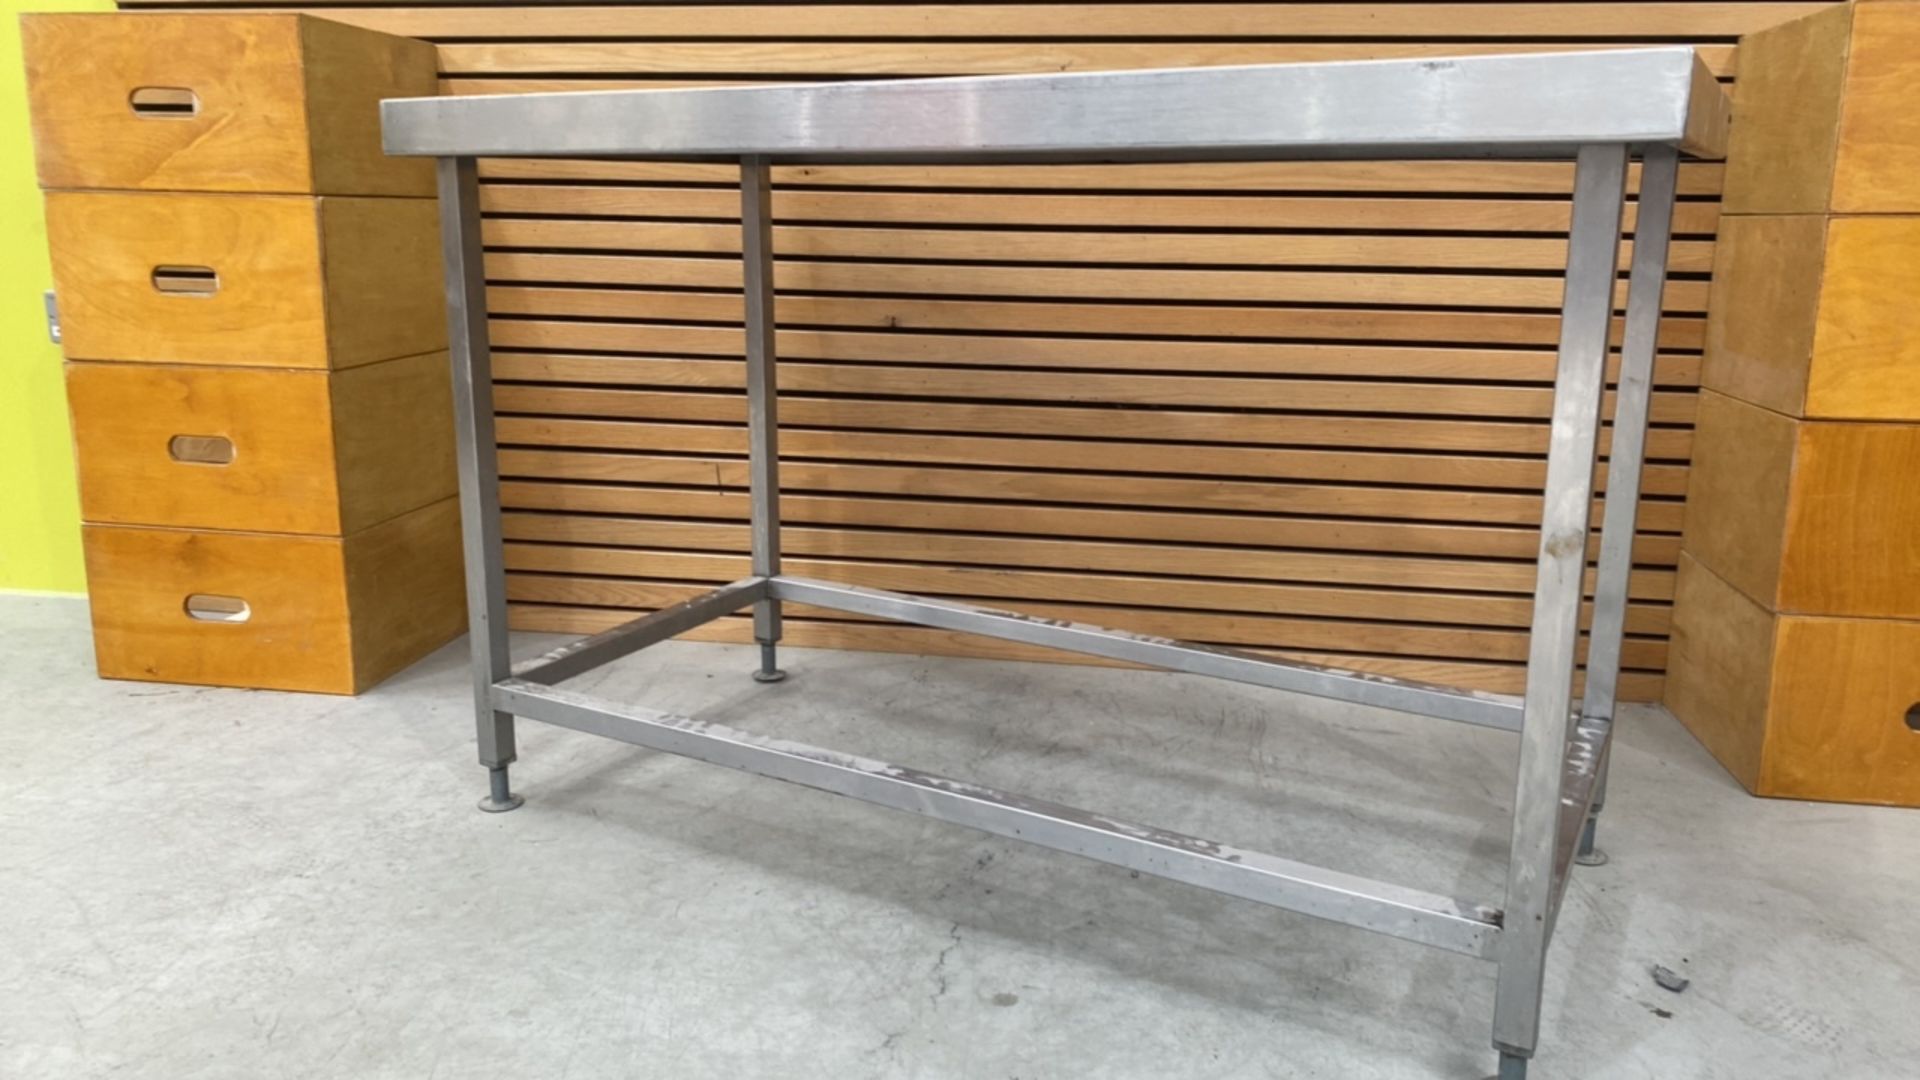 Stainless Steel Preparation Unit - Image 3 of 3